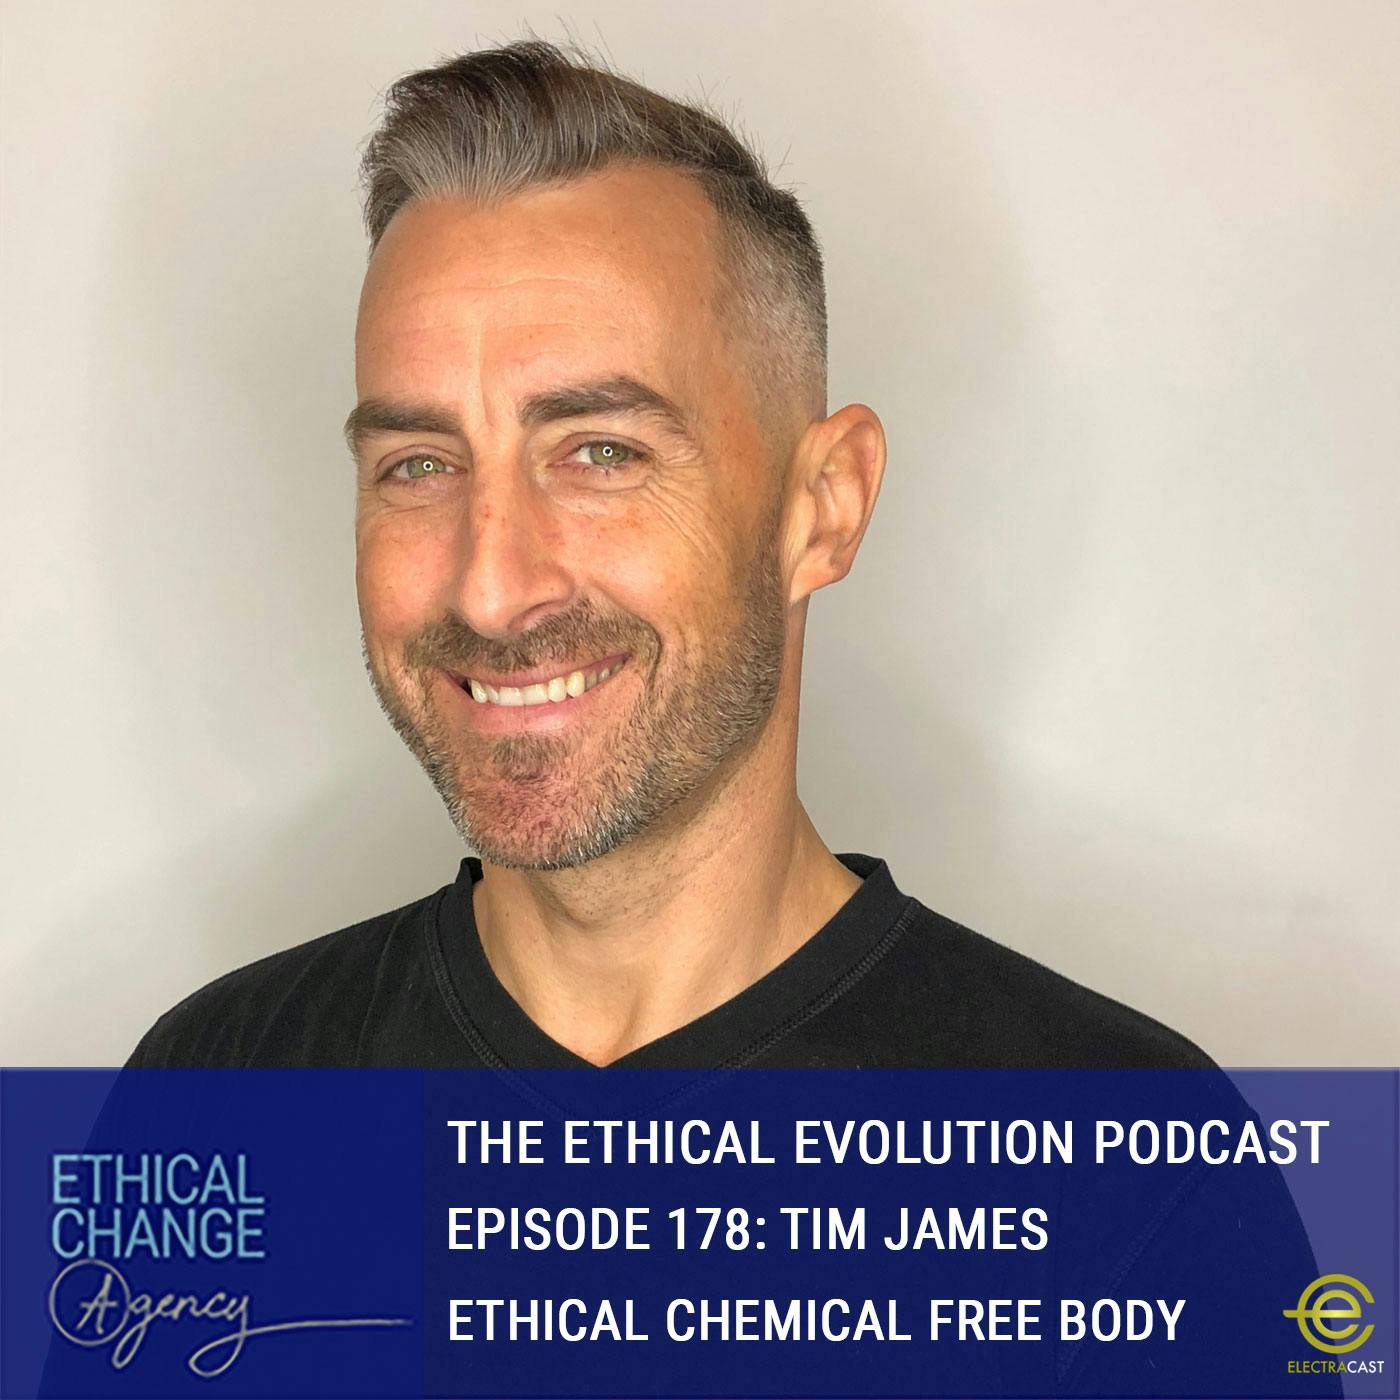 Ethical Chemical Free Body with Tim James